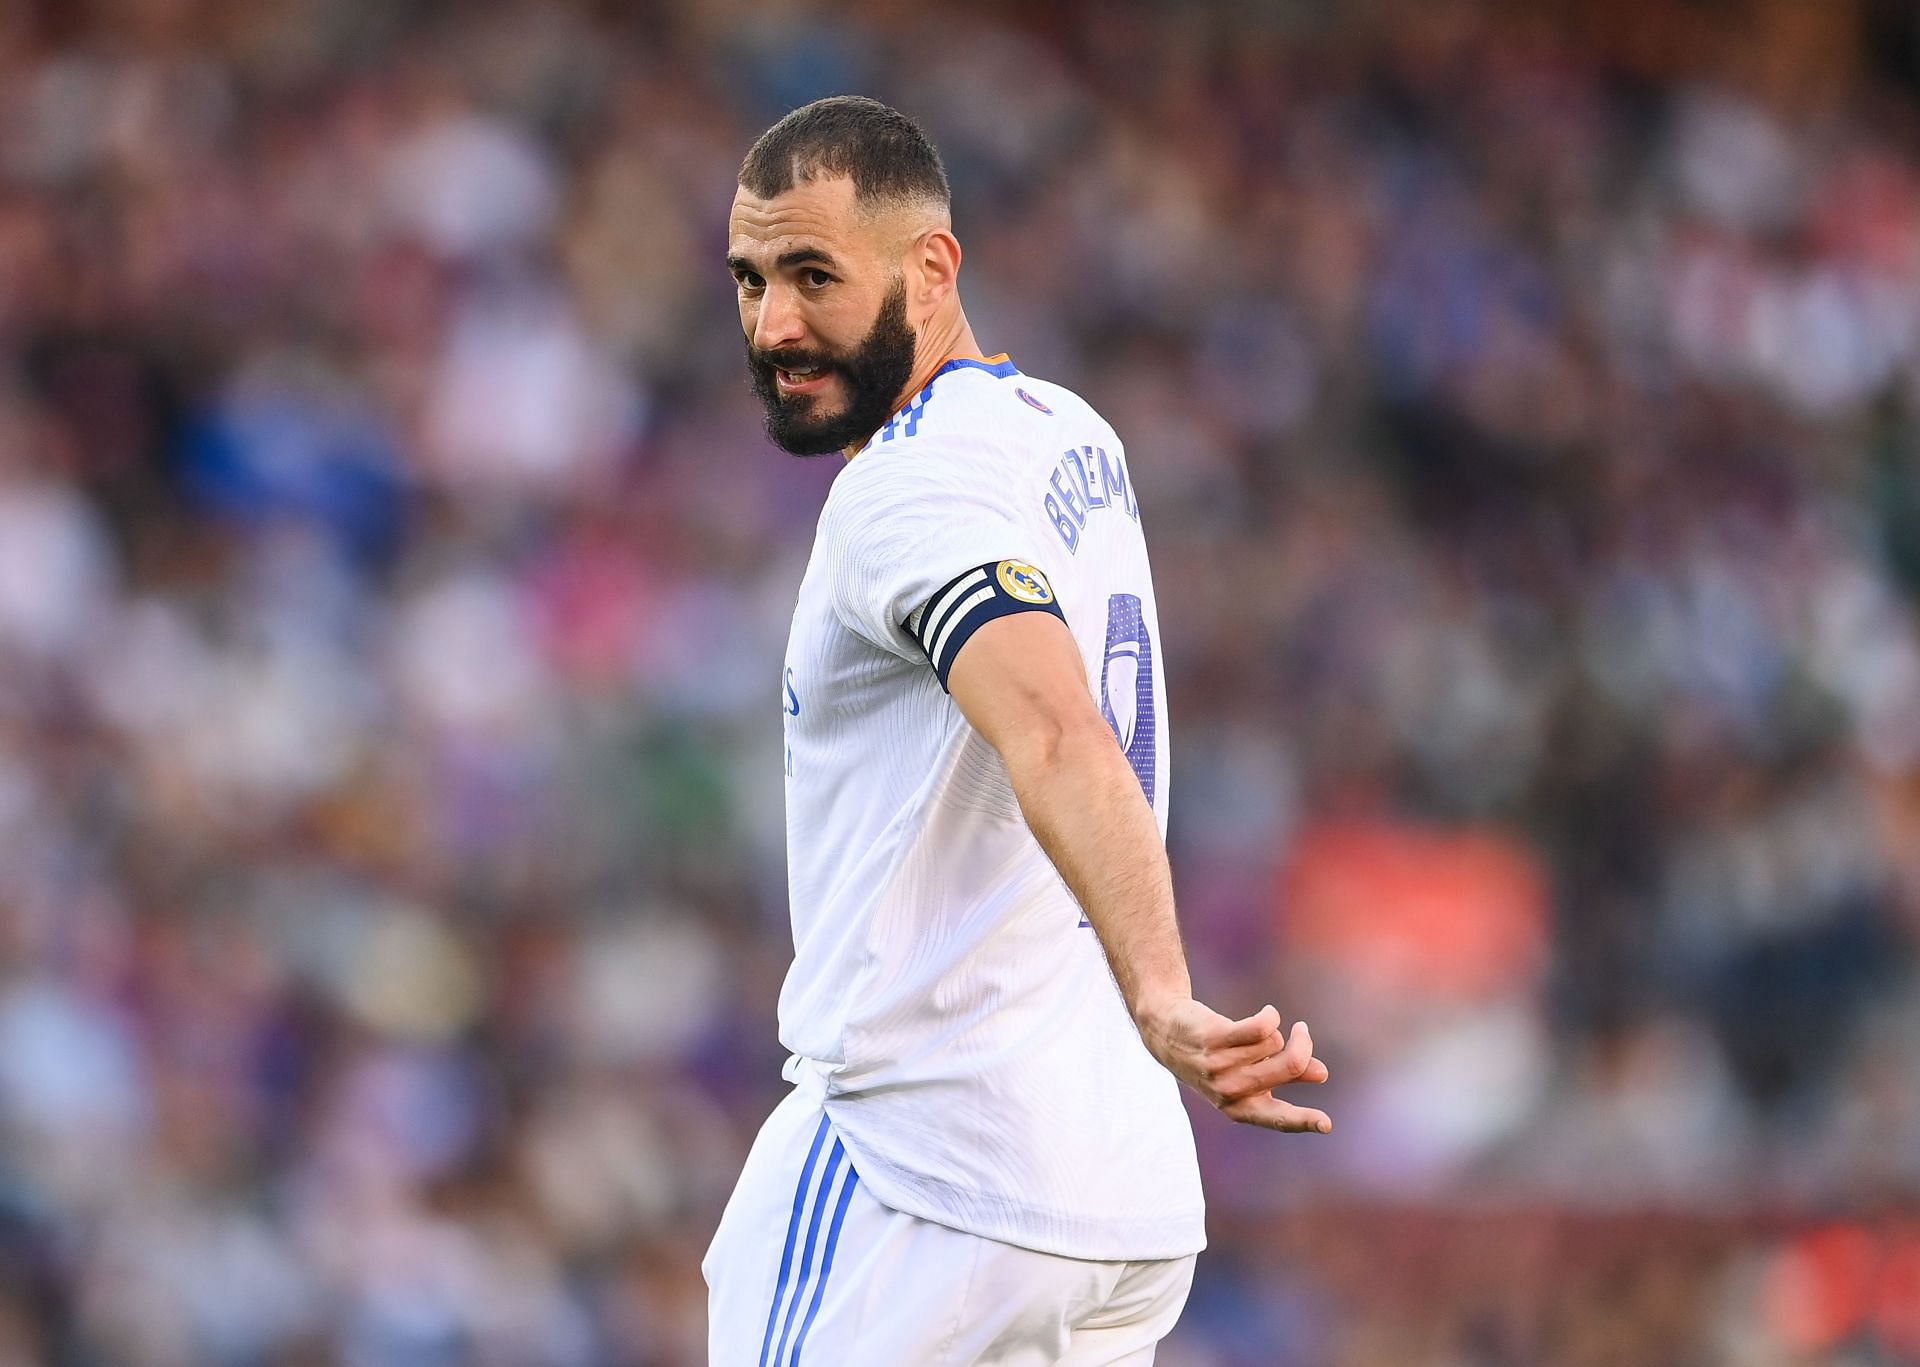 Karim Benzema has been on song for Real Madrid this season.